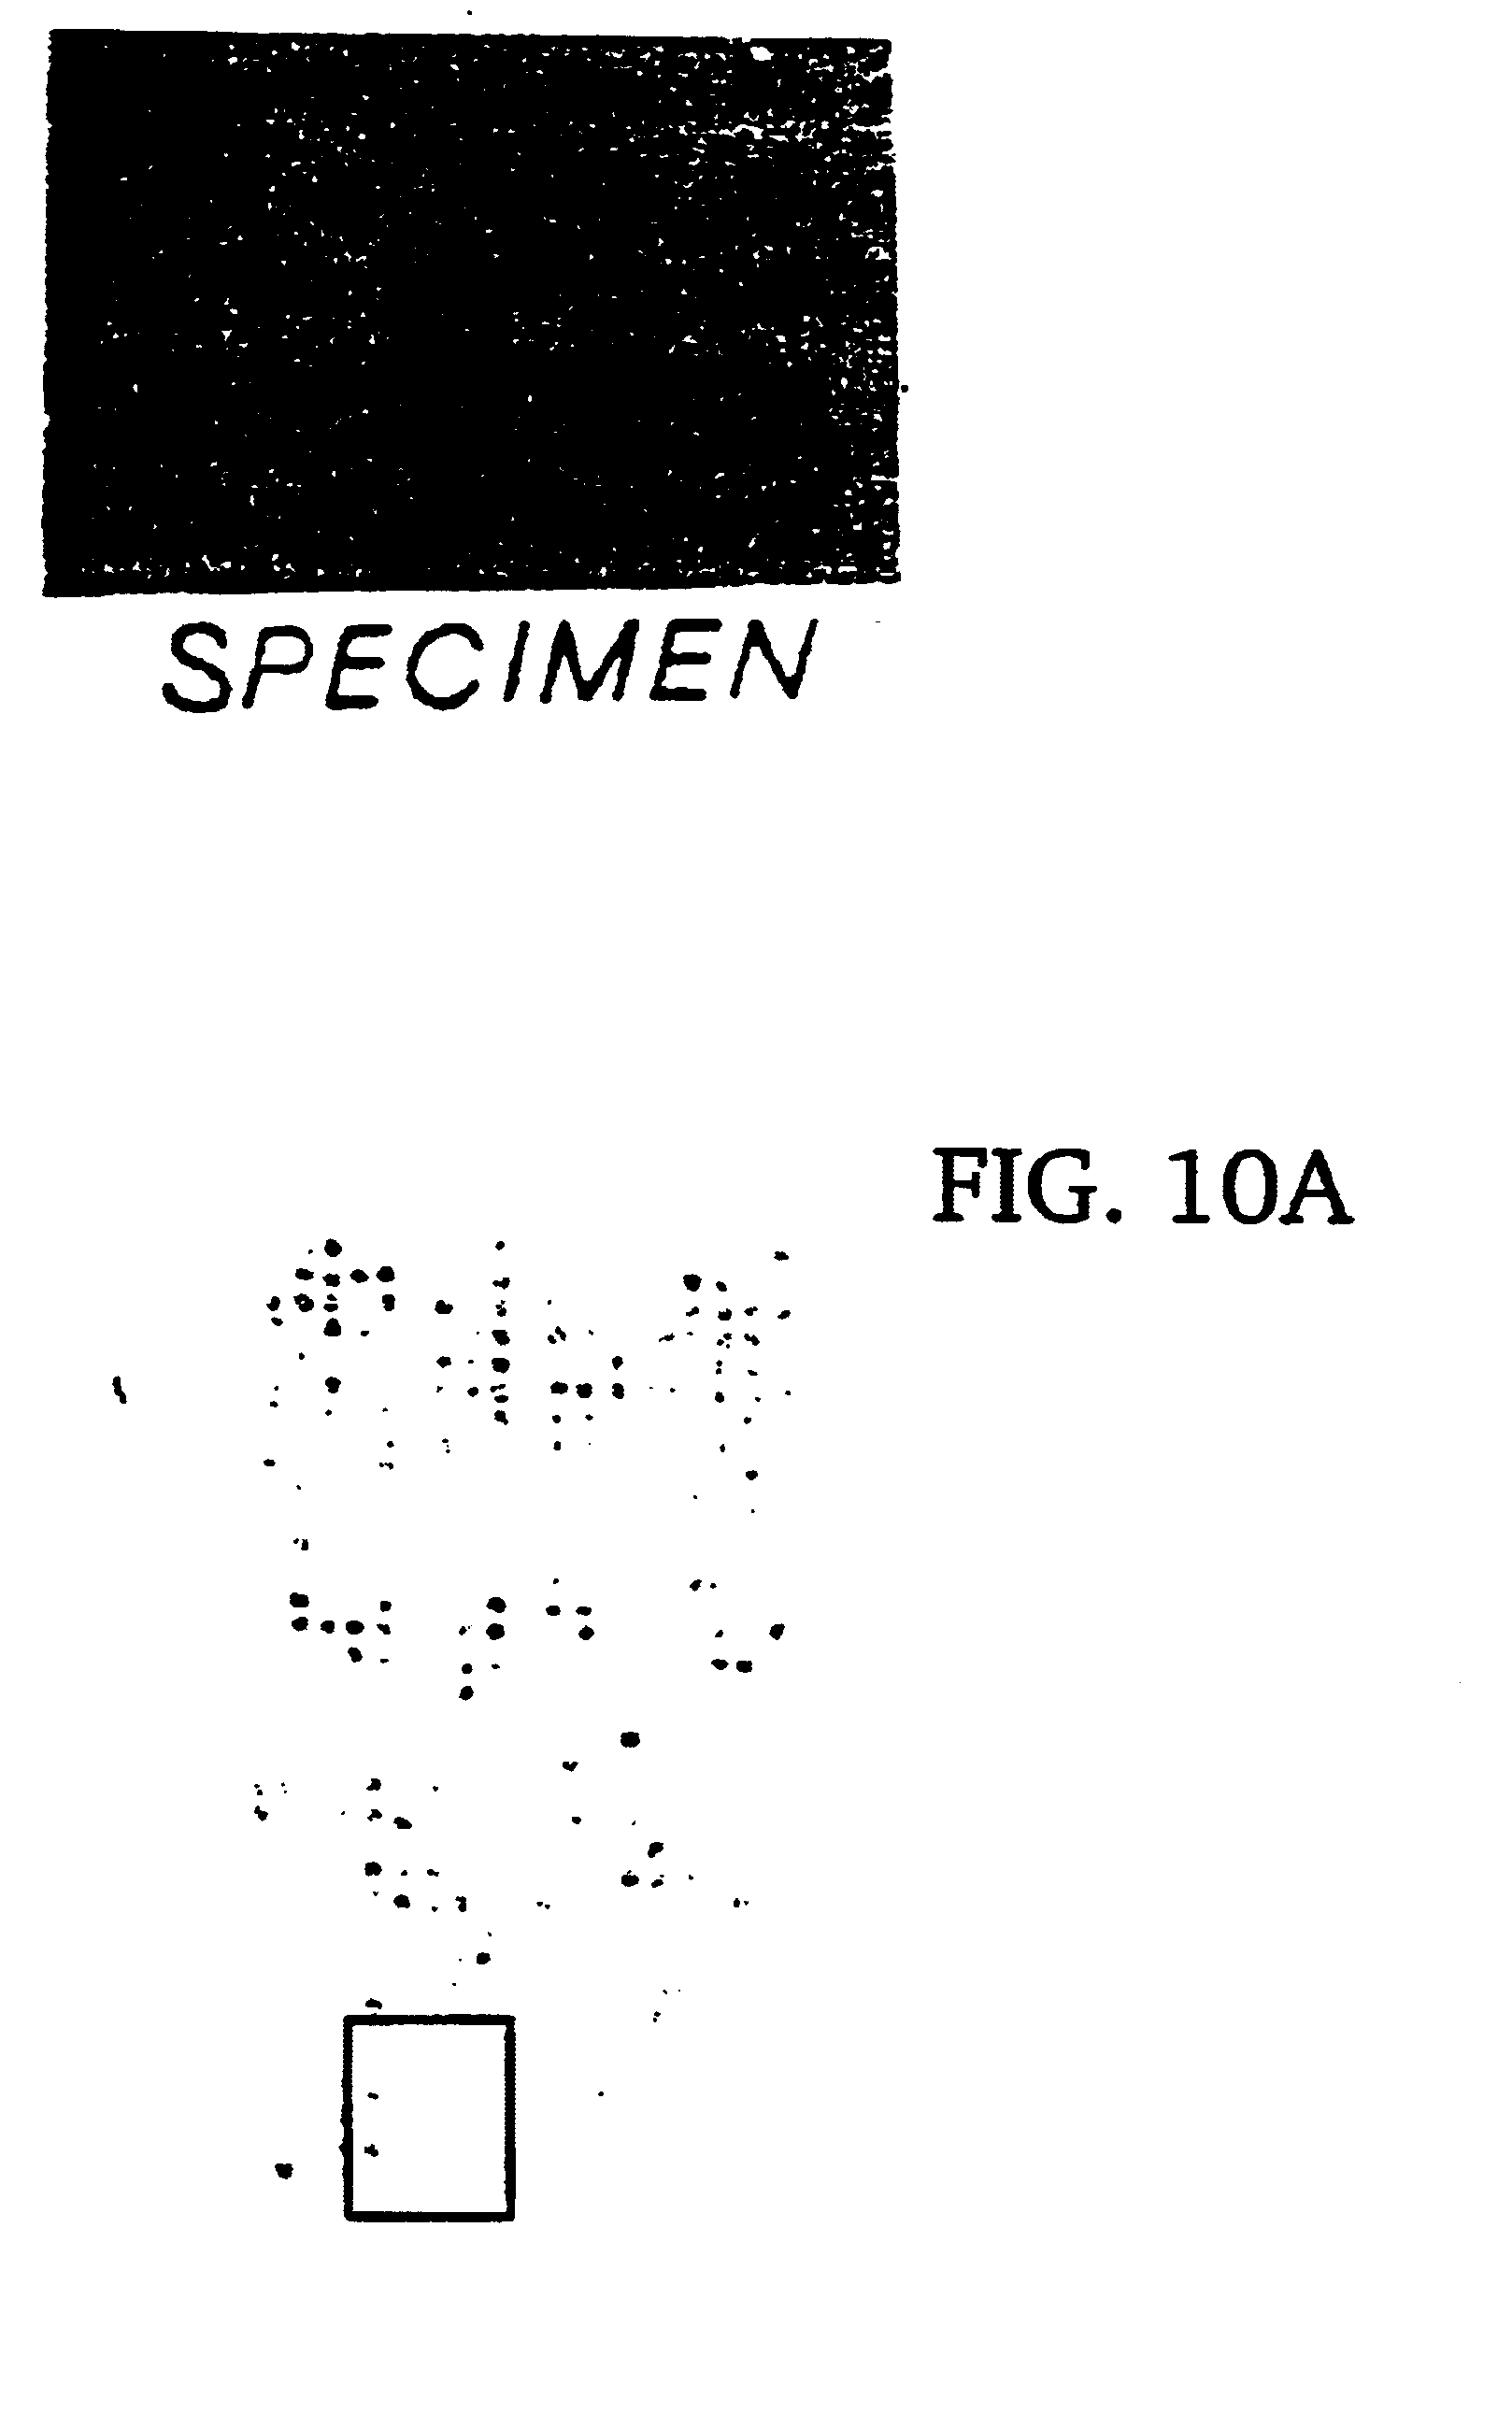 Cellular arrays and methods of detecting and using genetic disorder markers